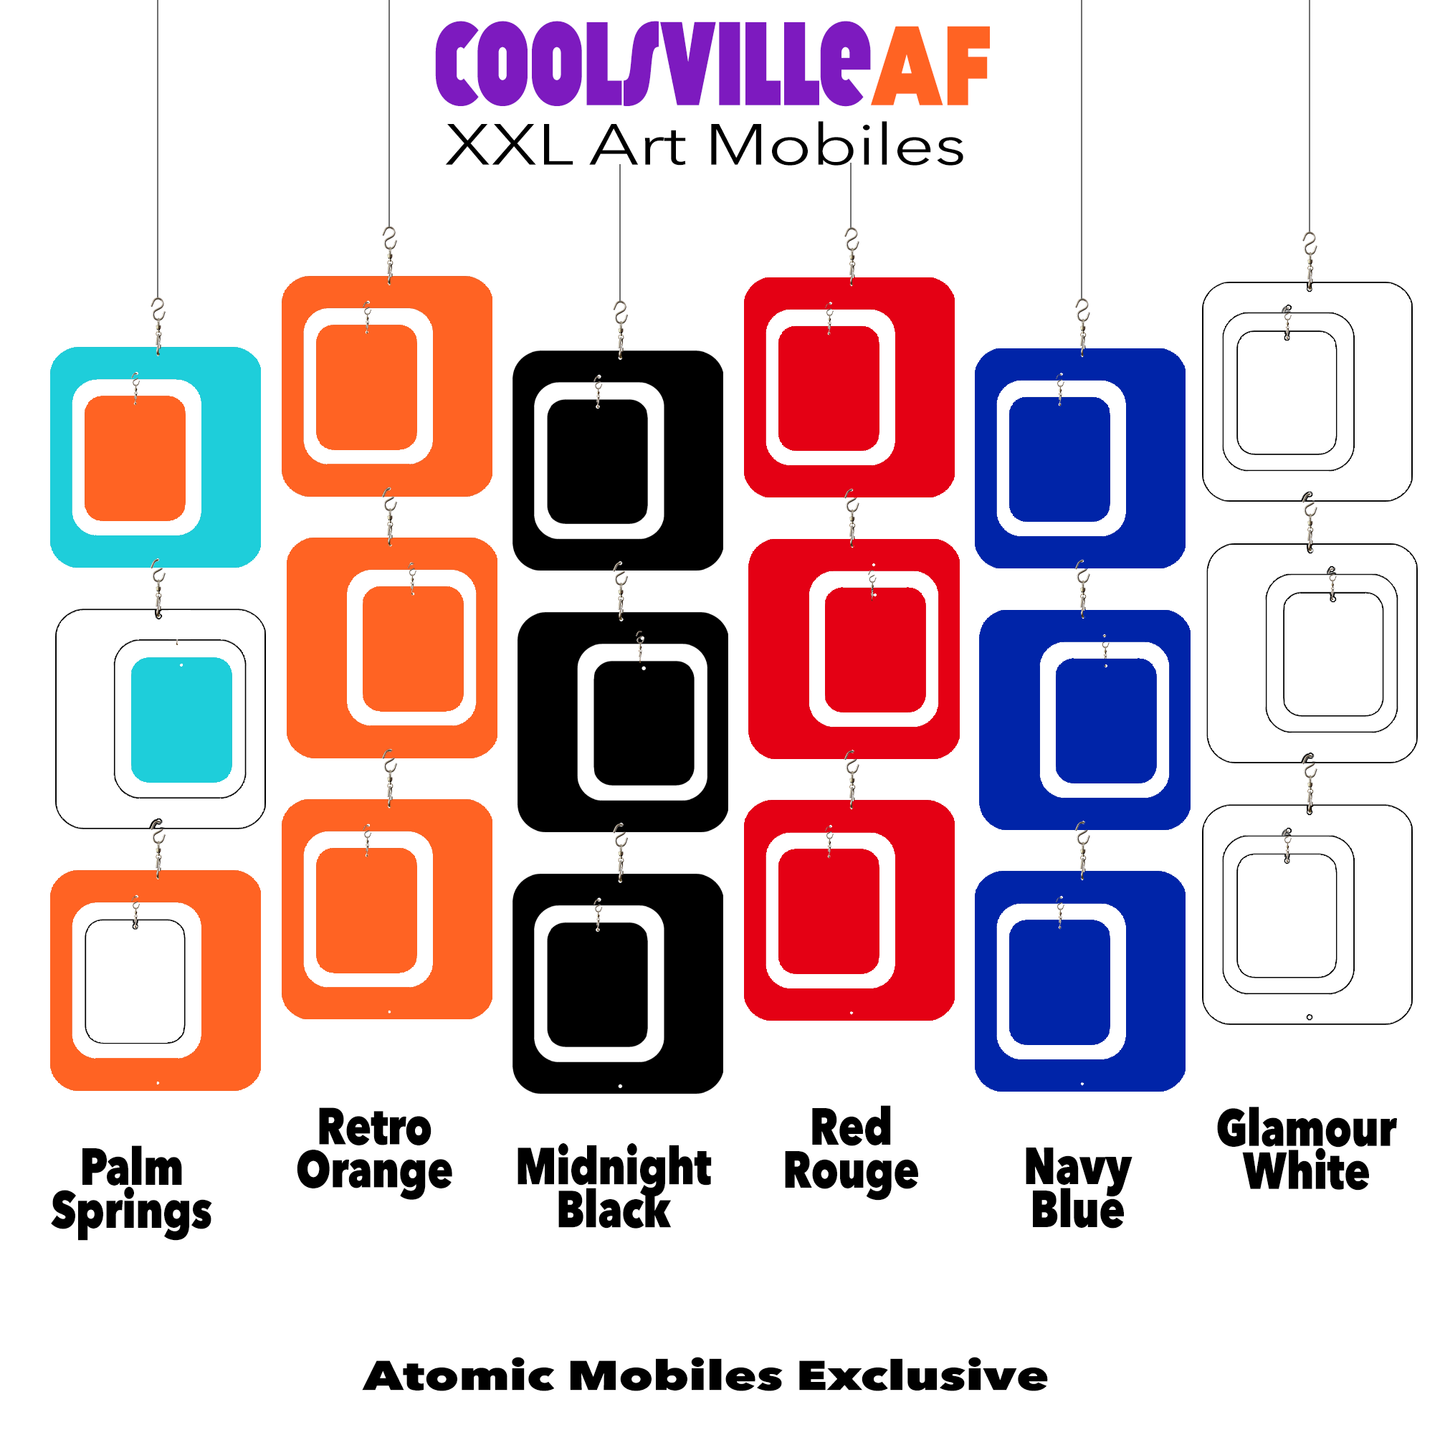 Colors for COOLSVILLE AF XXL Mobiles by AtomicMobiles.com